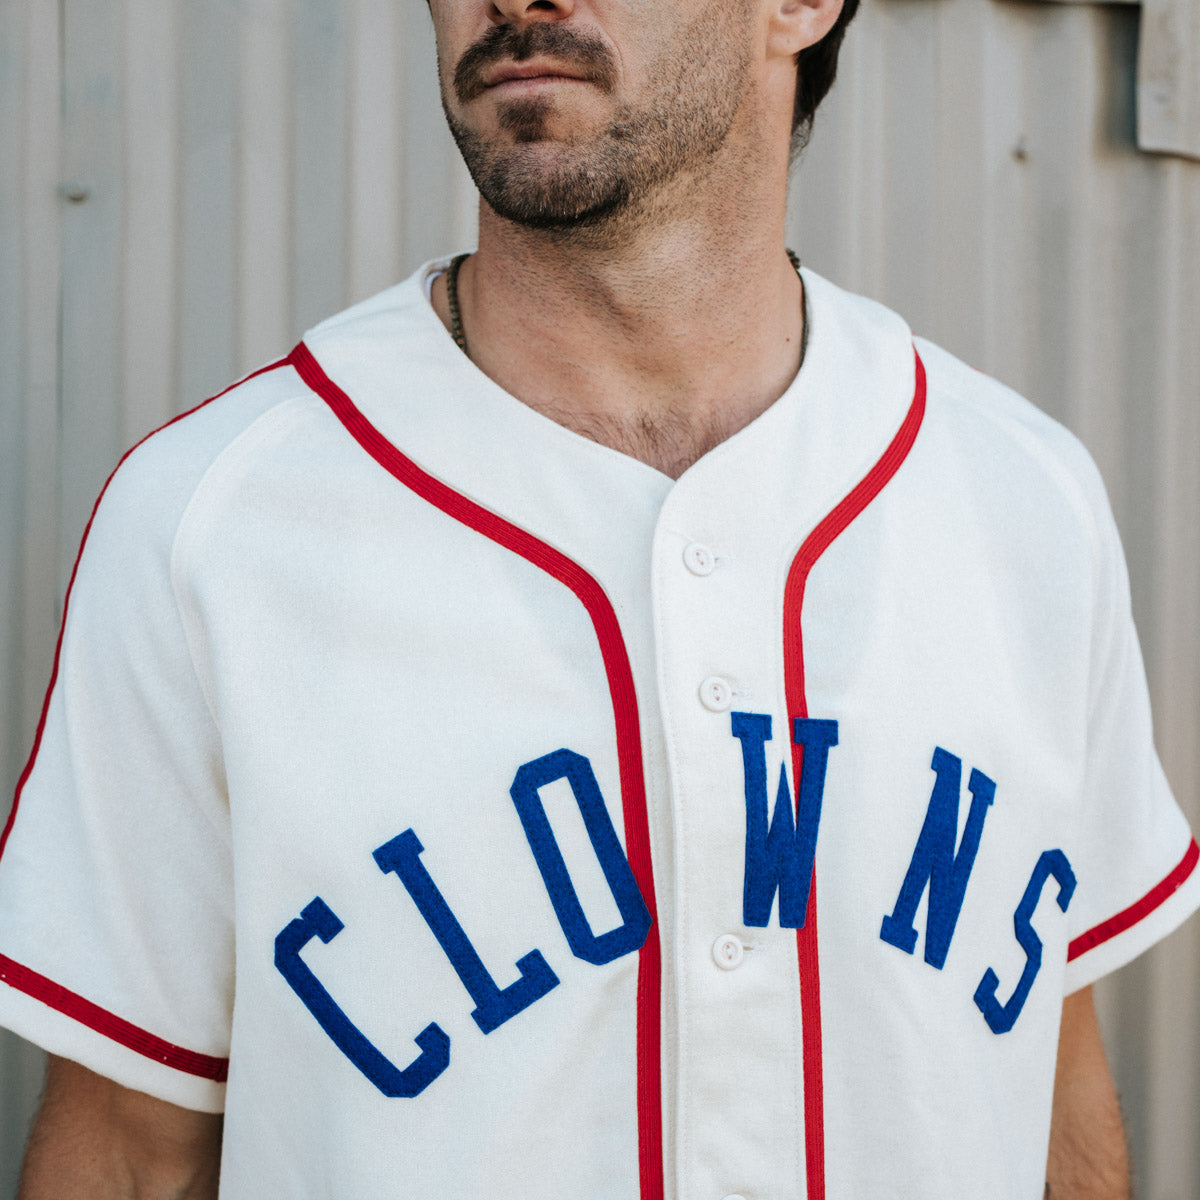 Indianapolis Clowns 1945 Home Jersey